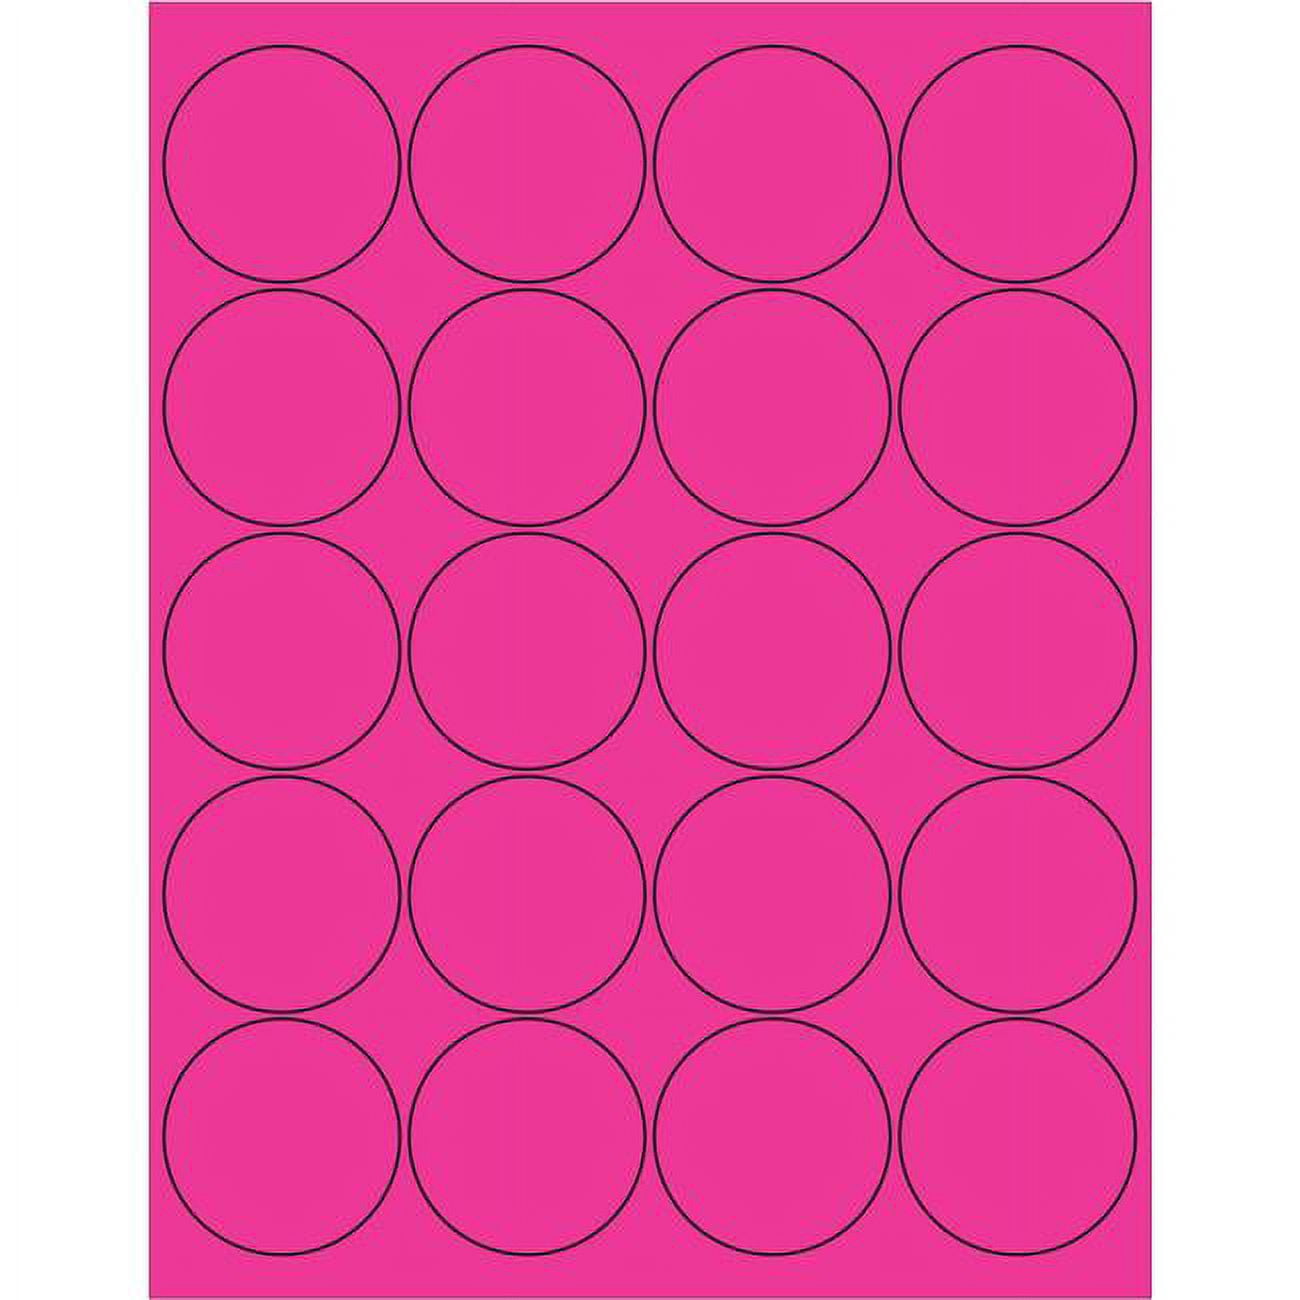 Ll197pk 2 In. Circle Laser Labels, Fluorescent Pink